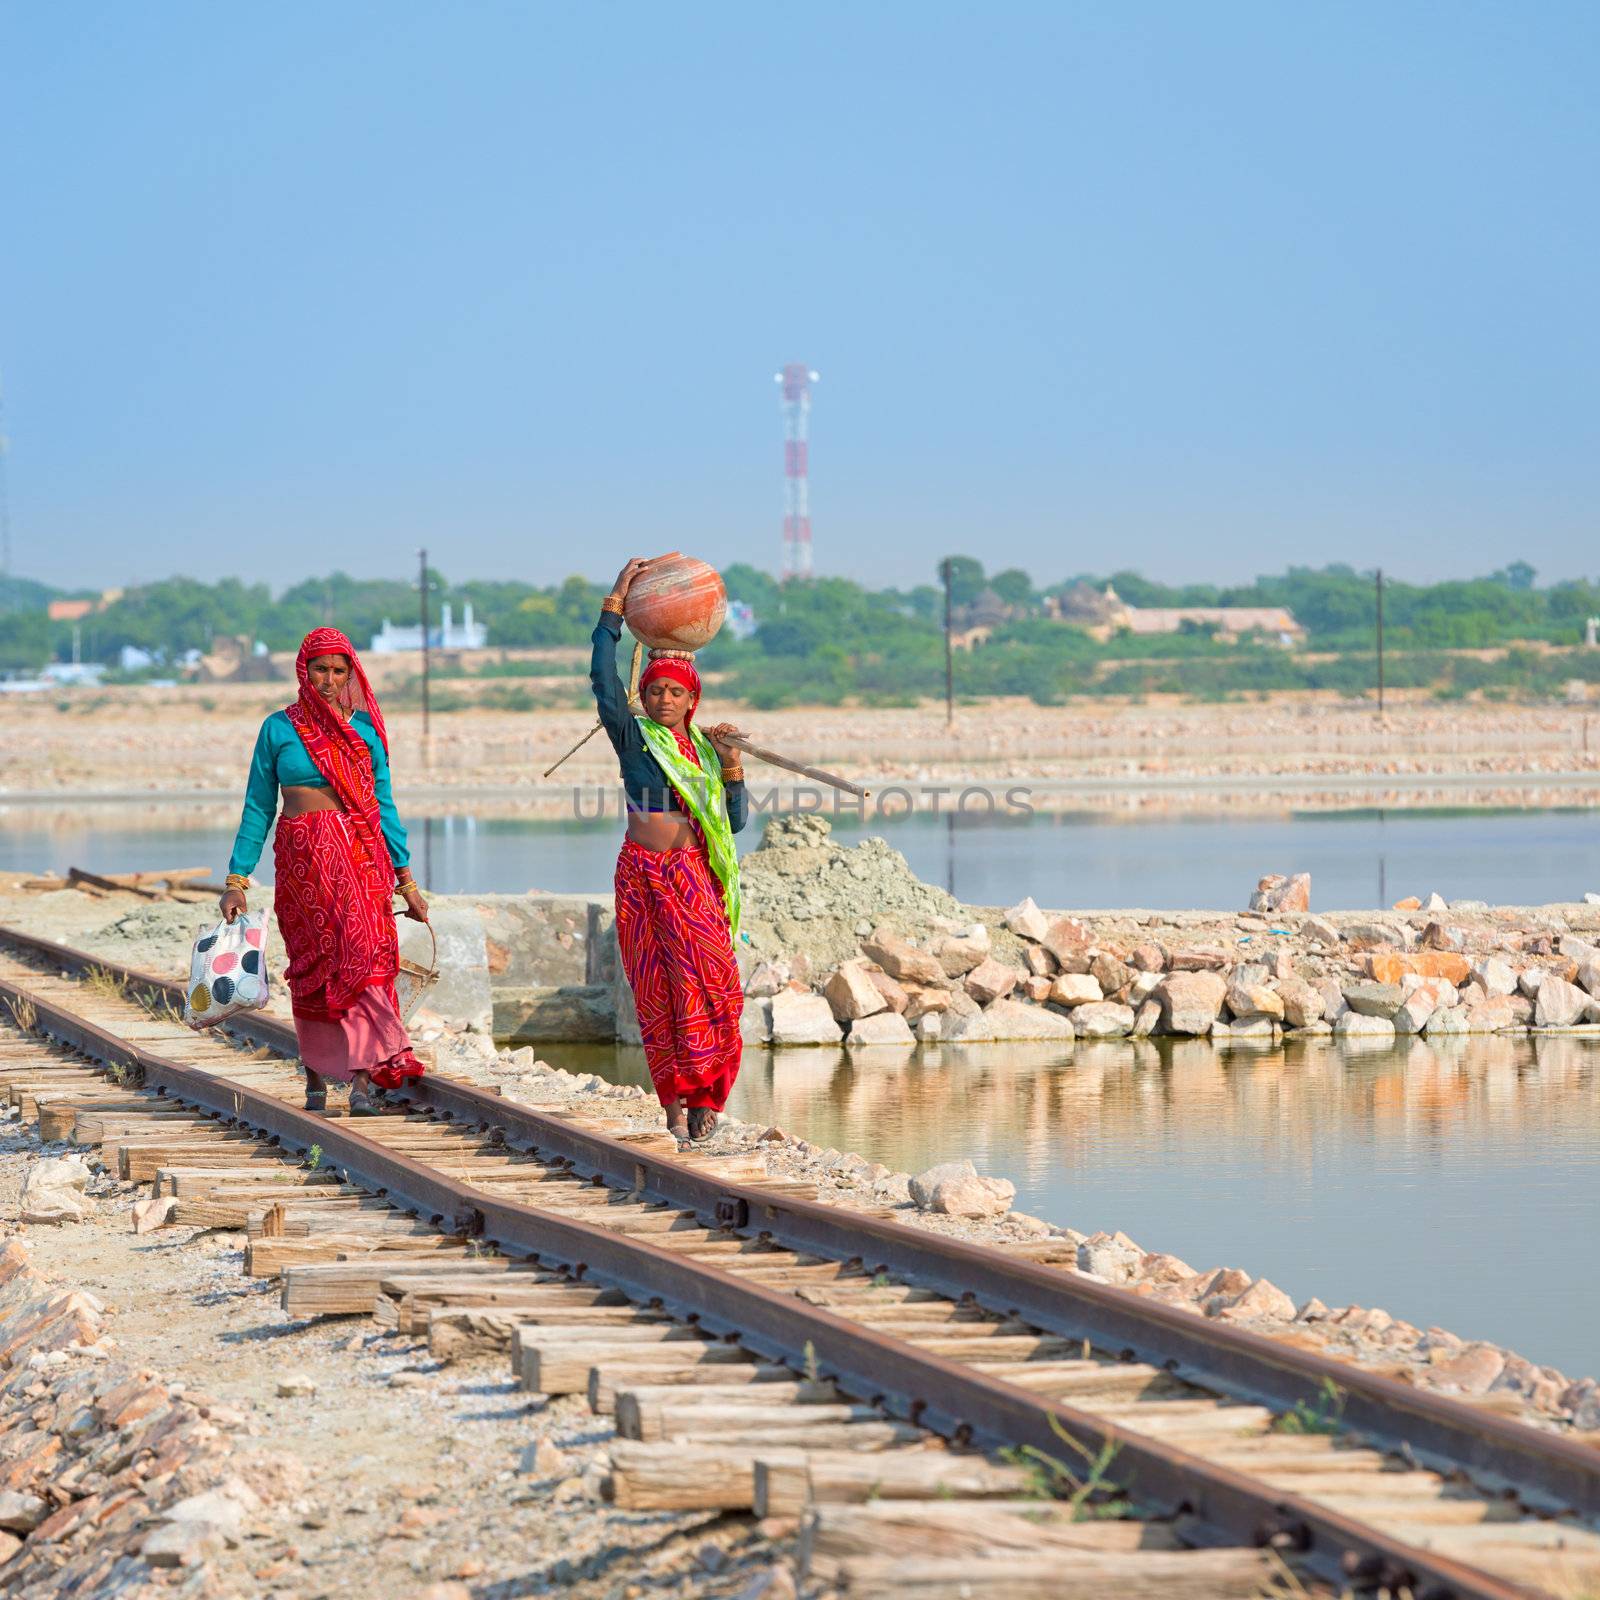 Sambhar, India - Nov 19: Female indian workers go along railway on Nov 19, 2012 in Sambhar Salt Lake, India. It is India's largest saline lake and and where salt has been farmed for a thousand years.